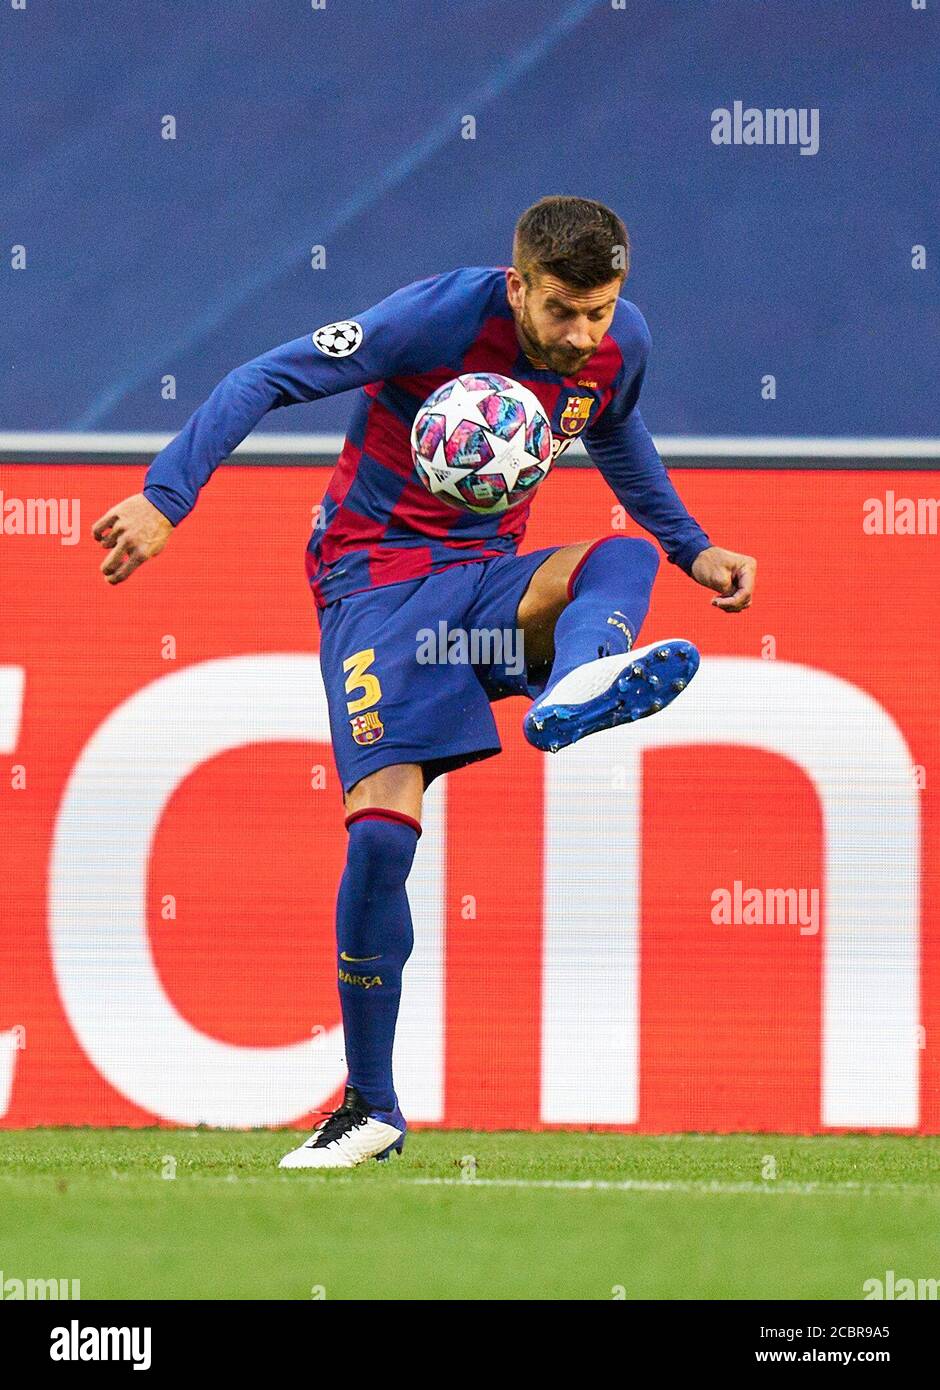 Lisbon, Lissabon, Portugal, 14th August 2020.  Gerard PIQUE, Barca 3  in the quarterfinal UEFA Champions League match final tournament FC BAYERN MUENCHEN - FC BARCELONA 8-2 in Season 2019/2020, FCB, Munich, Barca © Peter Schatz / Alamy Live News / Pool   - UEFA REGULATIONS PROHIBIT ANY USE OF PHOTOGRAPHS as IMAGE SEQUENCES and/or QUASI-VIDEO -  National and international News-Agencies OUT Editorial Use ONLY Stock Photo